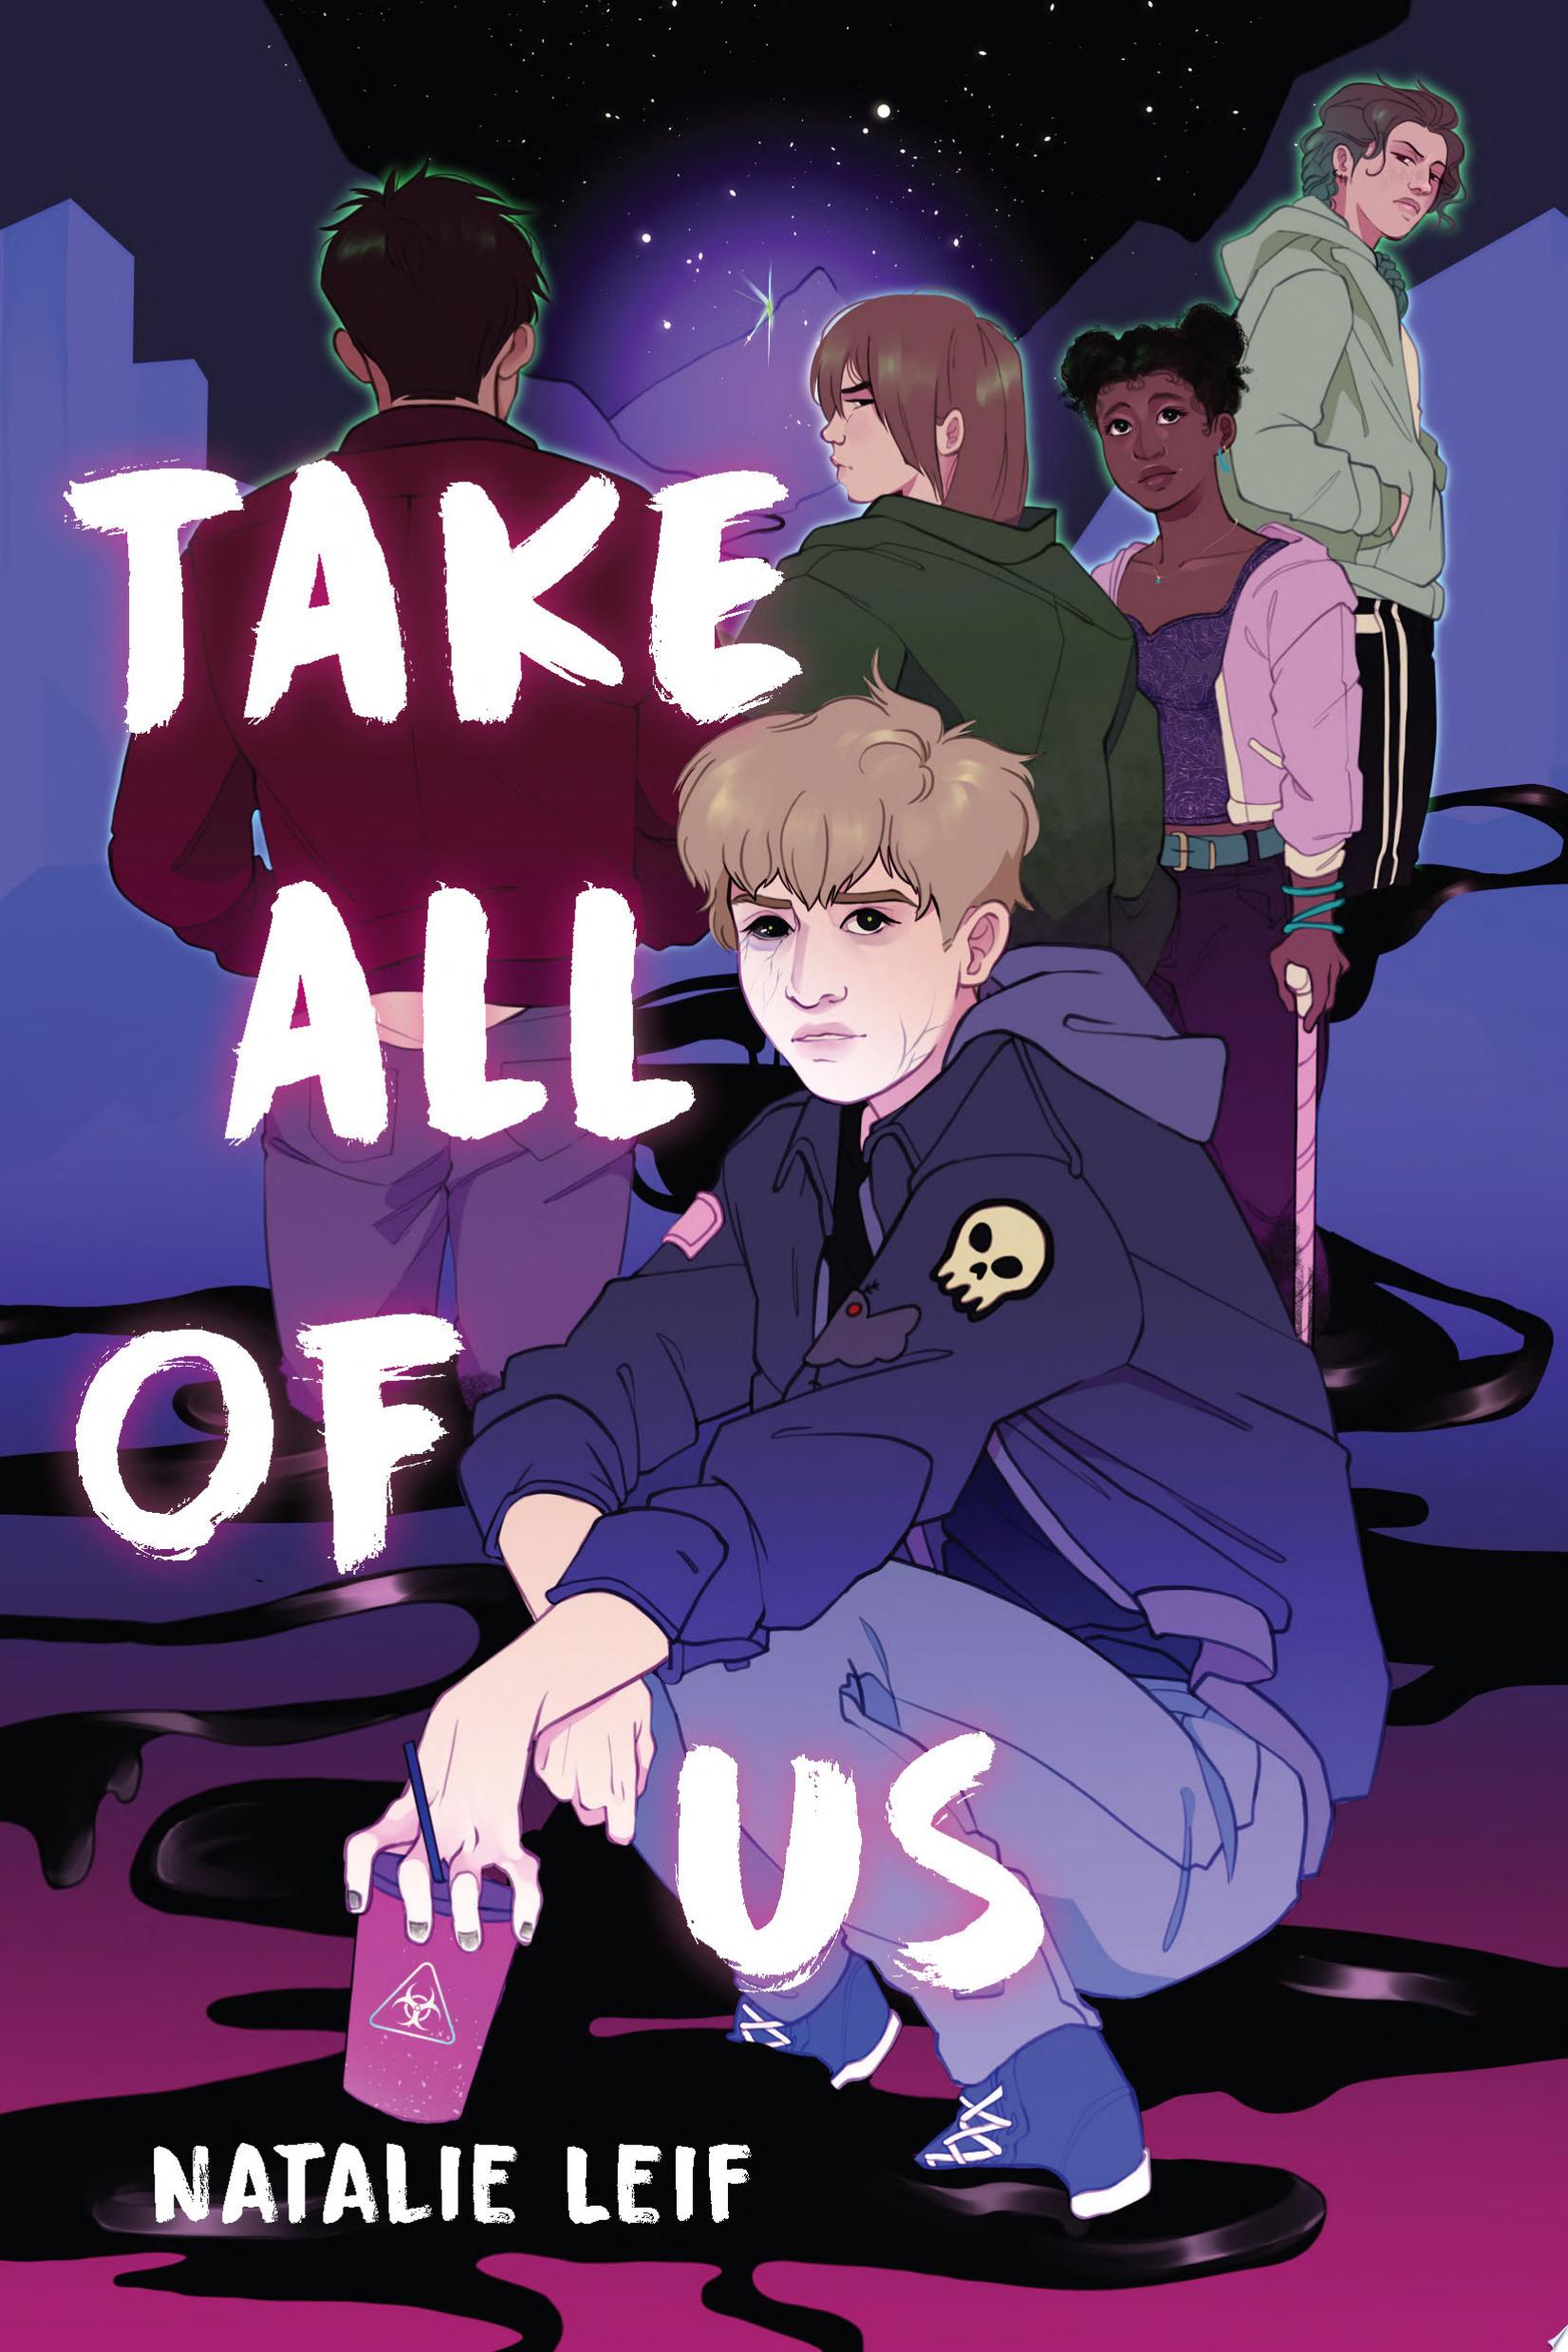 Image for "Take All of Us"